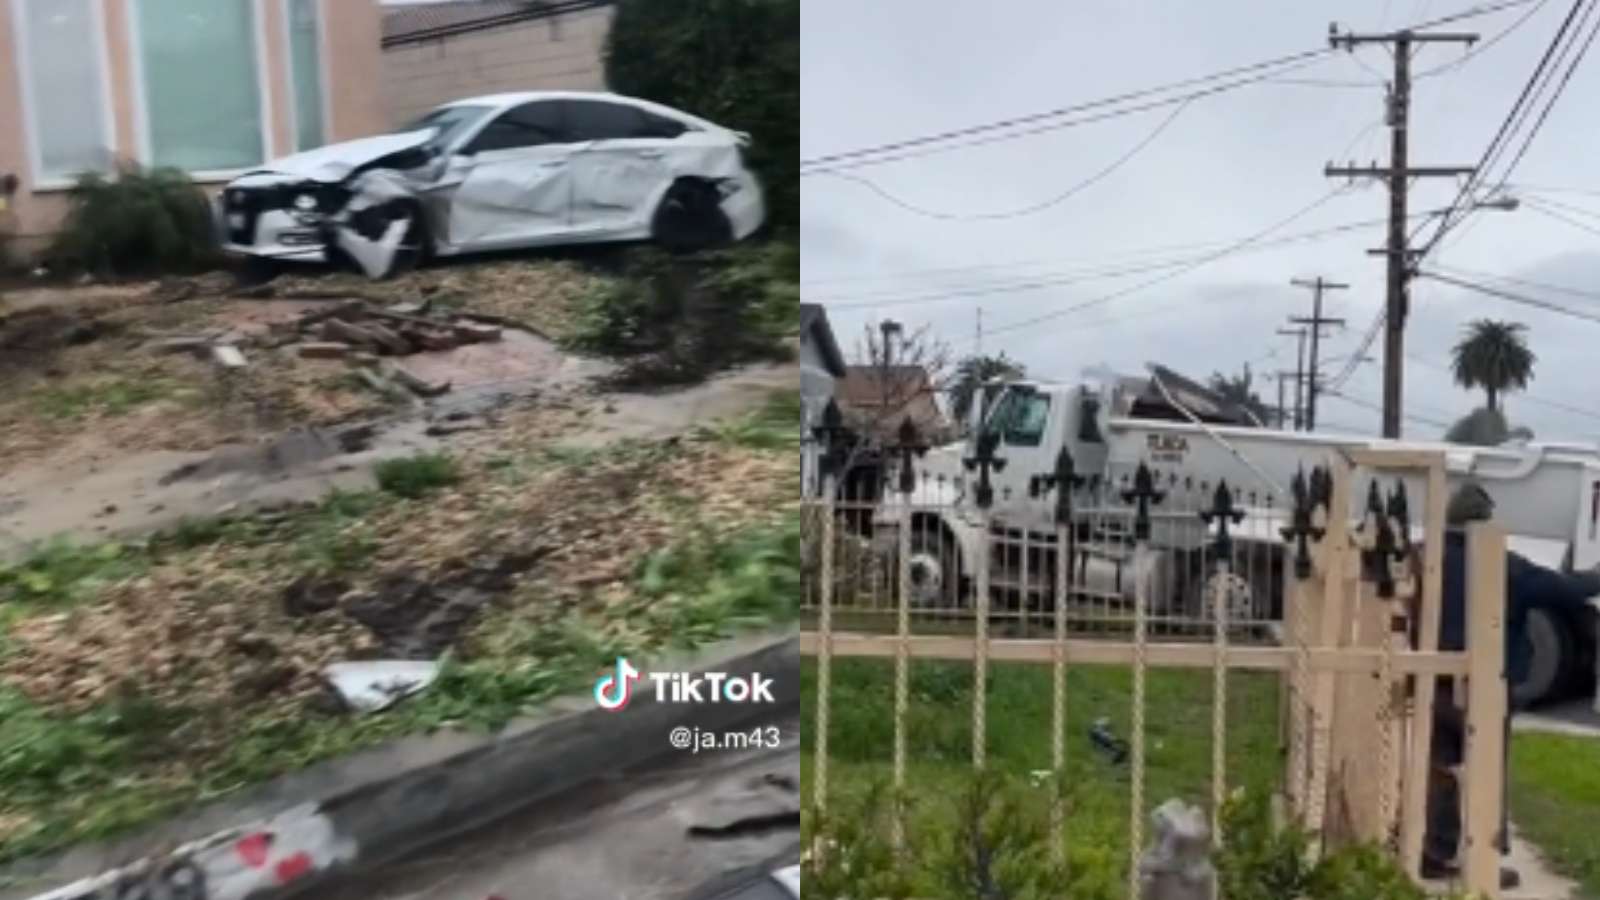 man crashes truck into ex-wife's house in viral tiktok